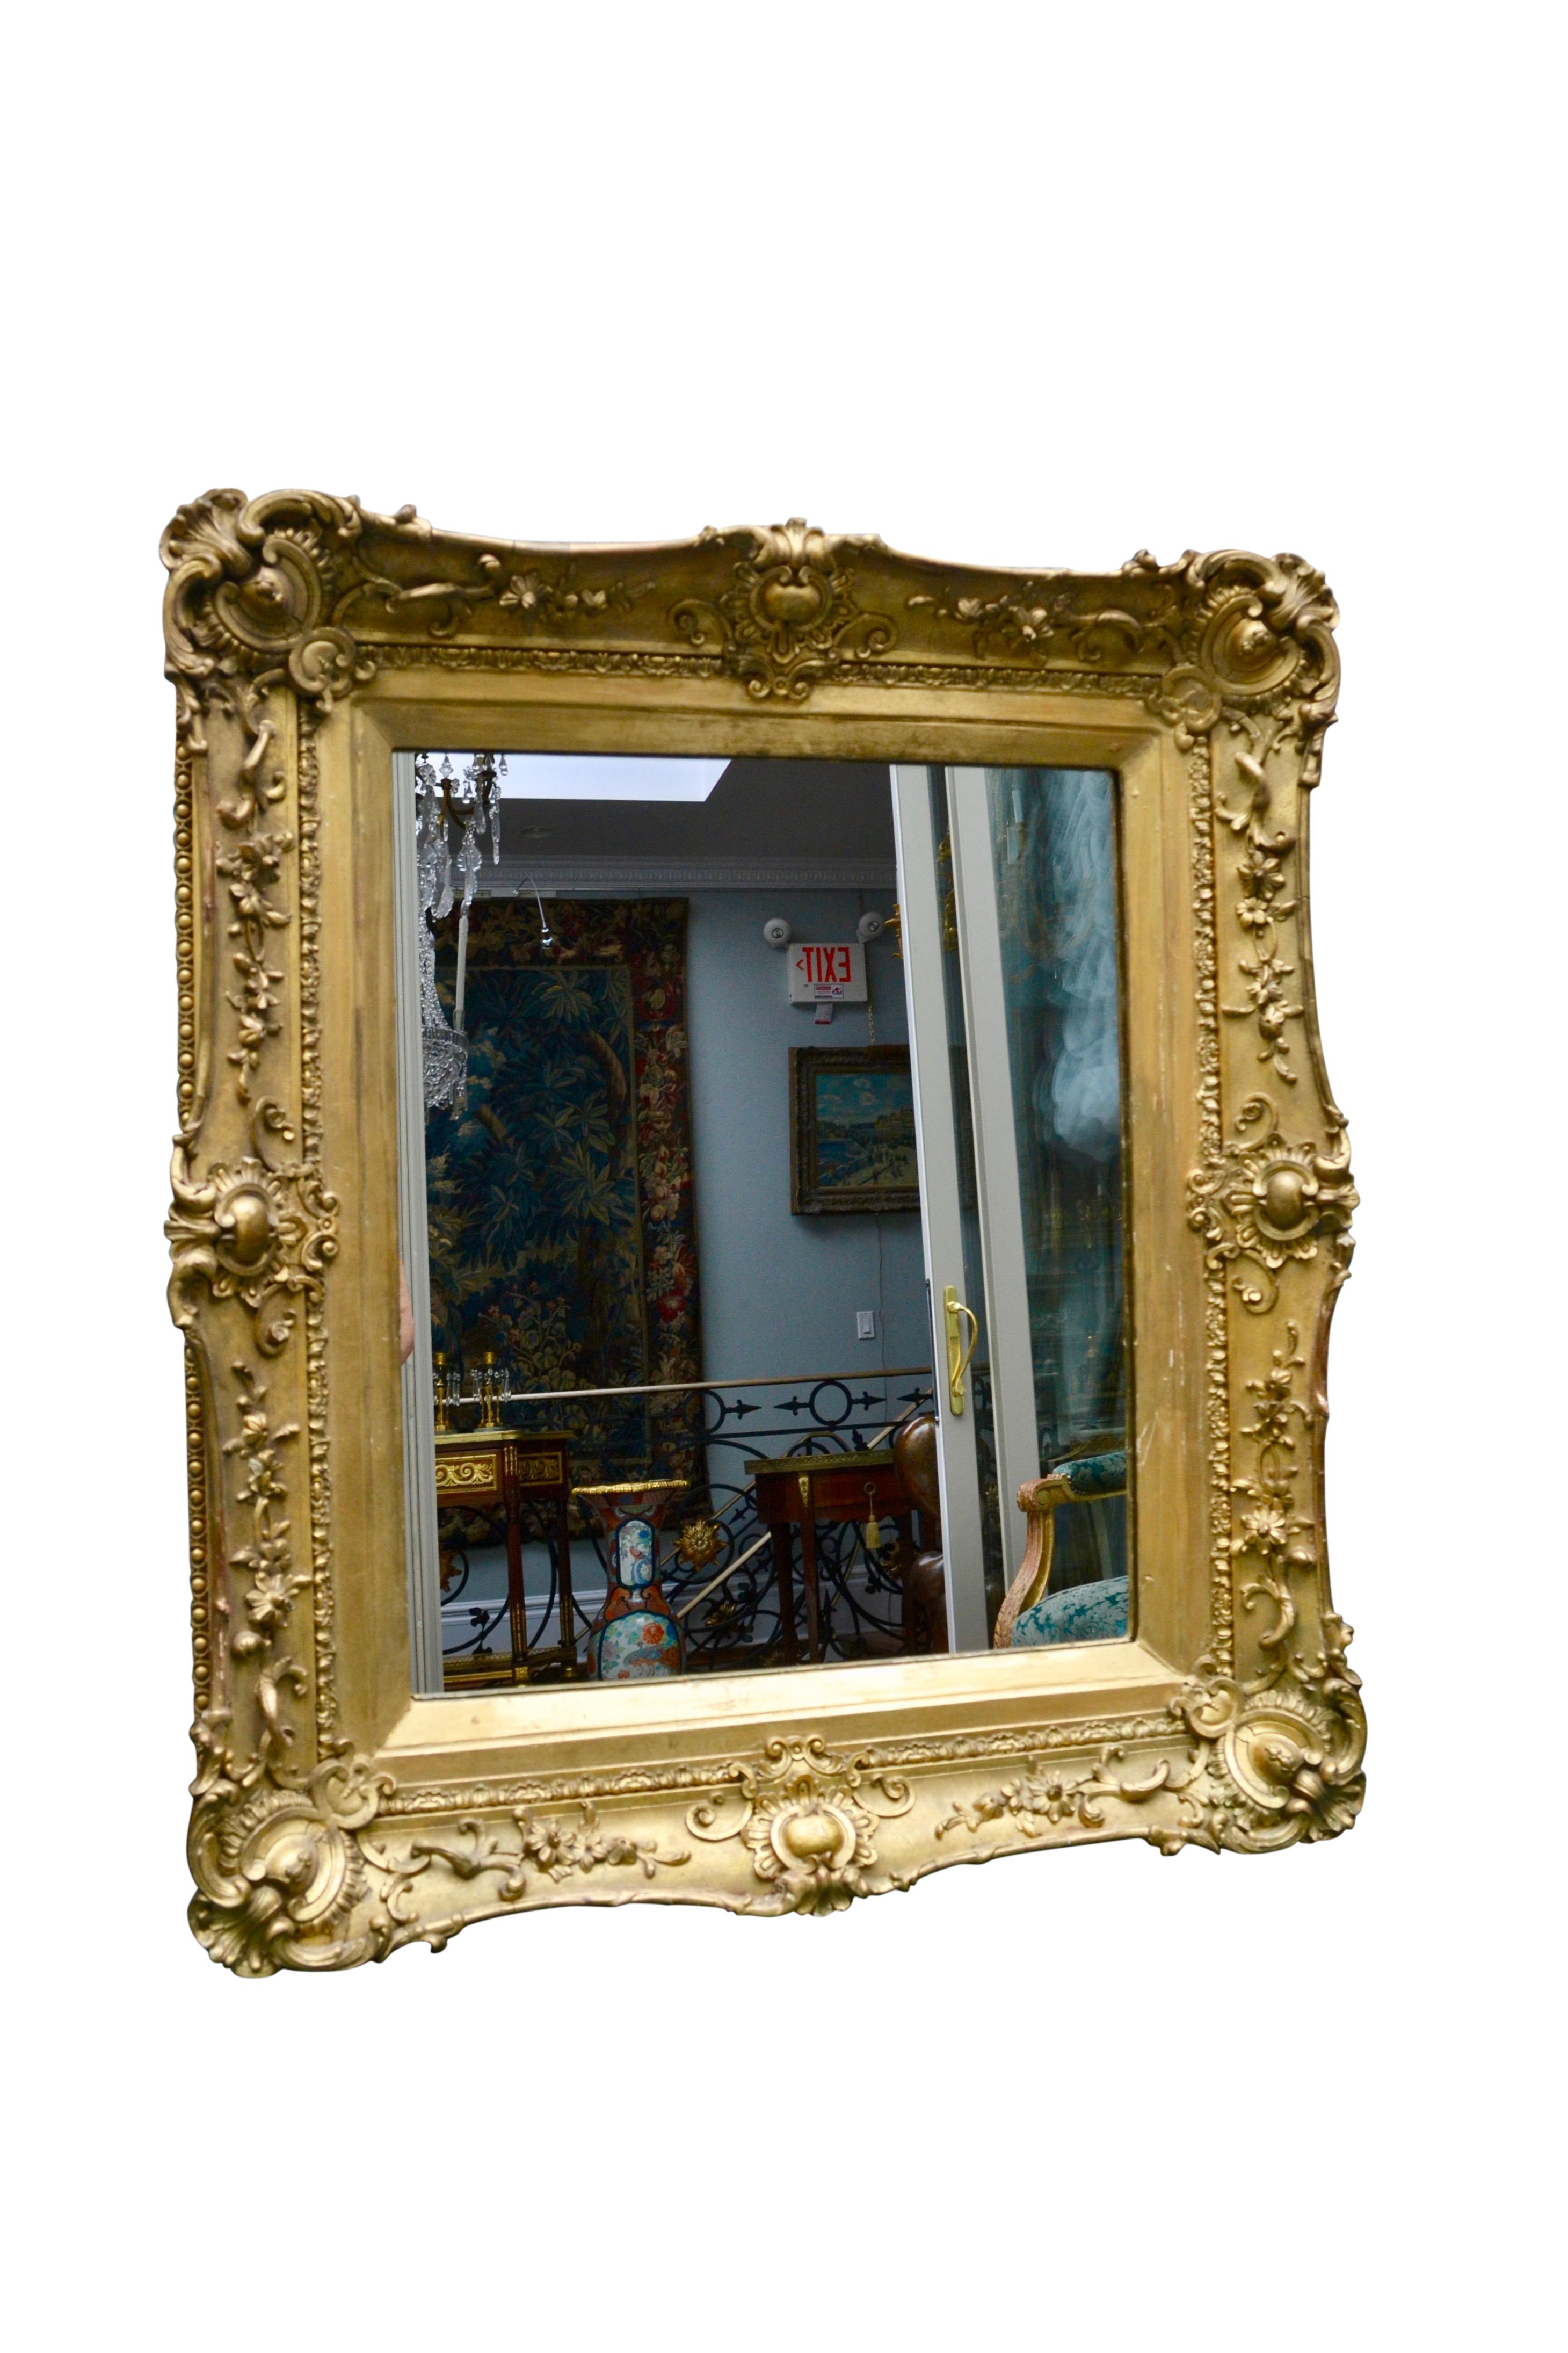 A fine model 18th century French framed mirror. The style of mirror originated in the mid-18th century in France and has been popular ever since. The carved wood and gesso frame has been gilded as has the filet around the mirror. The mirror has been